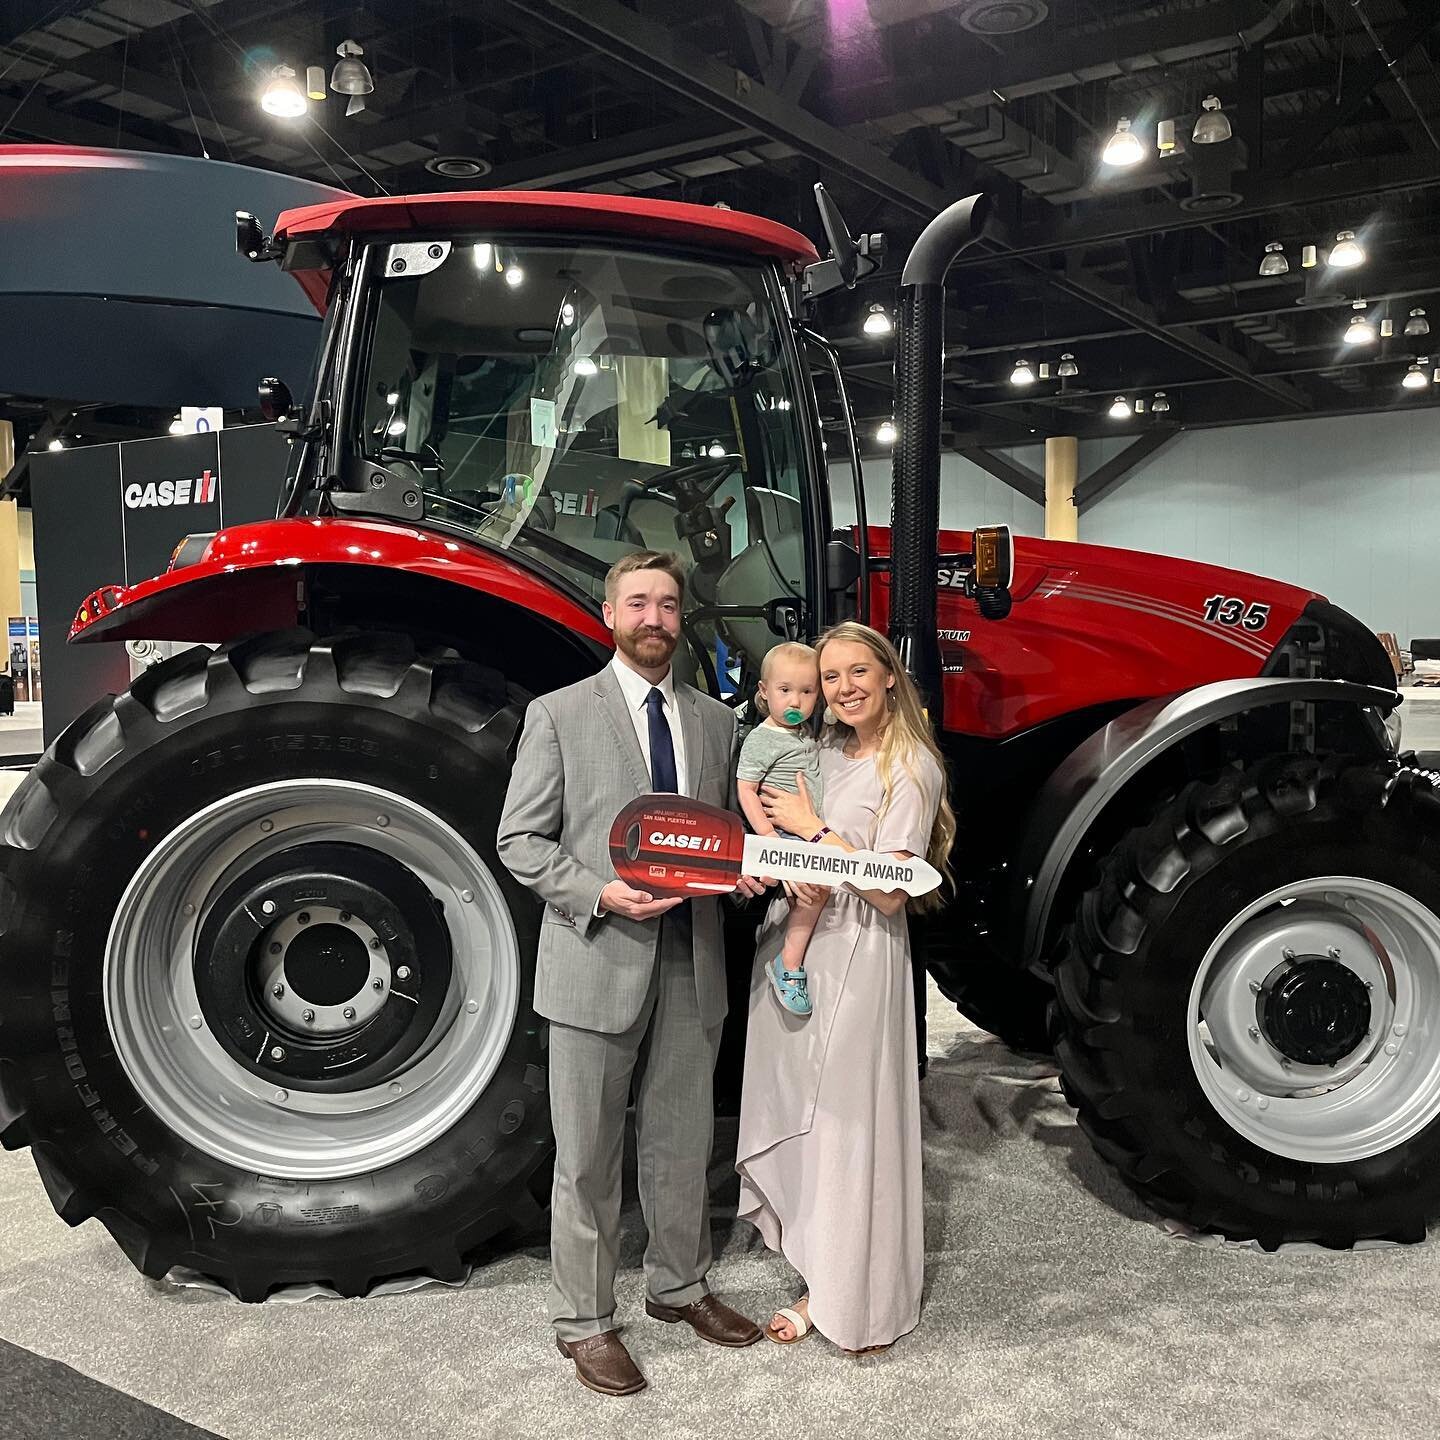 We are finally home after an incredible trip to Puerto Rico with our @tnfarmbureau family!

We were honored to be chosen as the National Runner Up for the @afbfyfr Achievement Award, an award that has inspired us for many years!

This competition rec